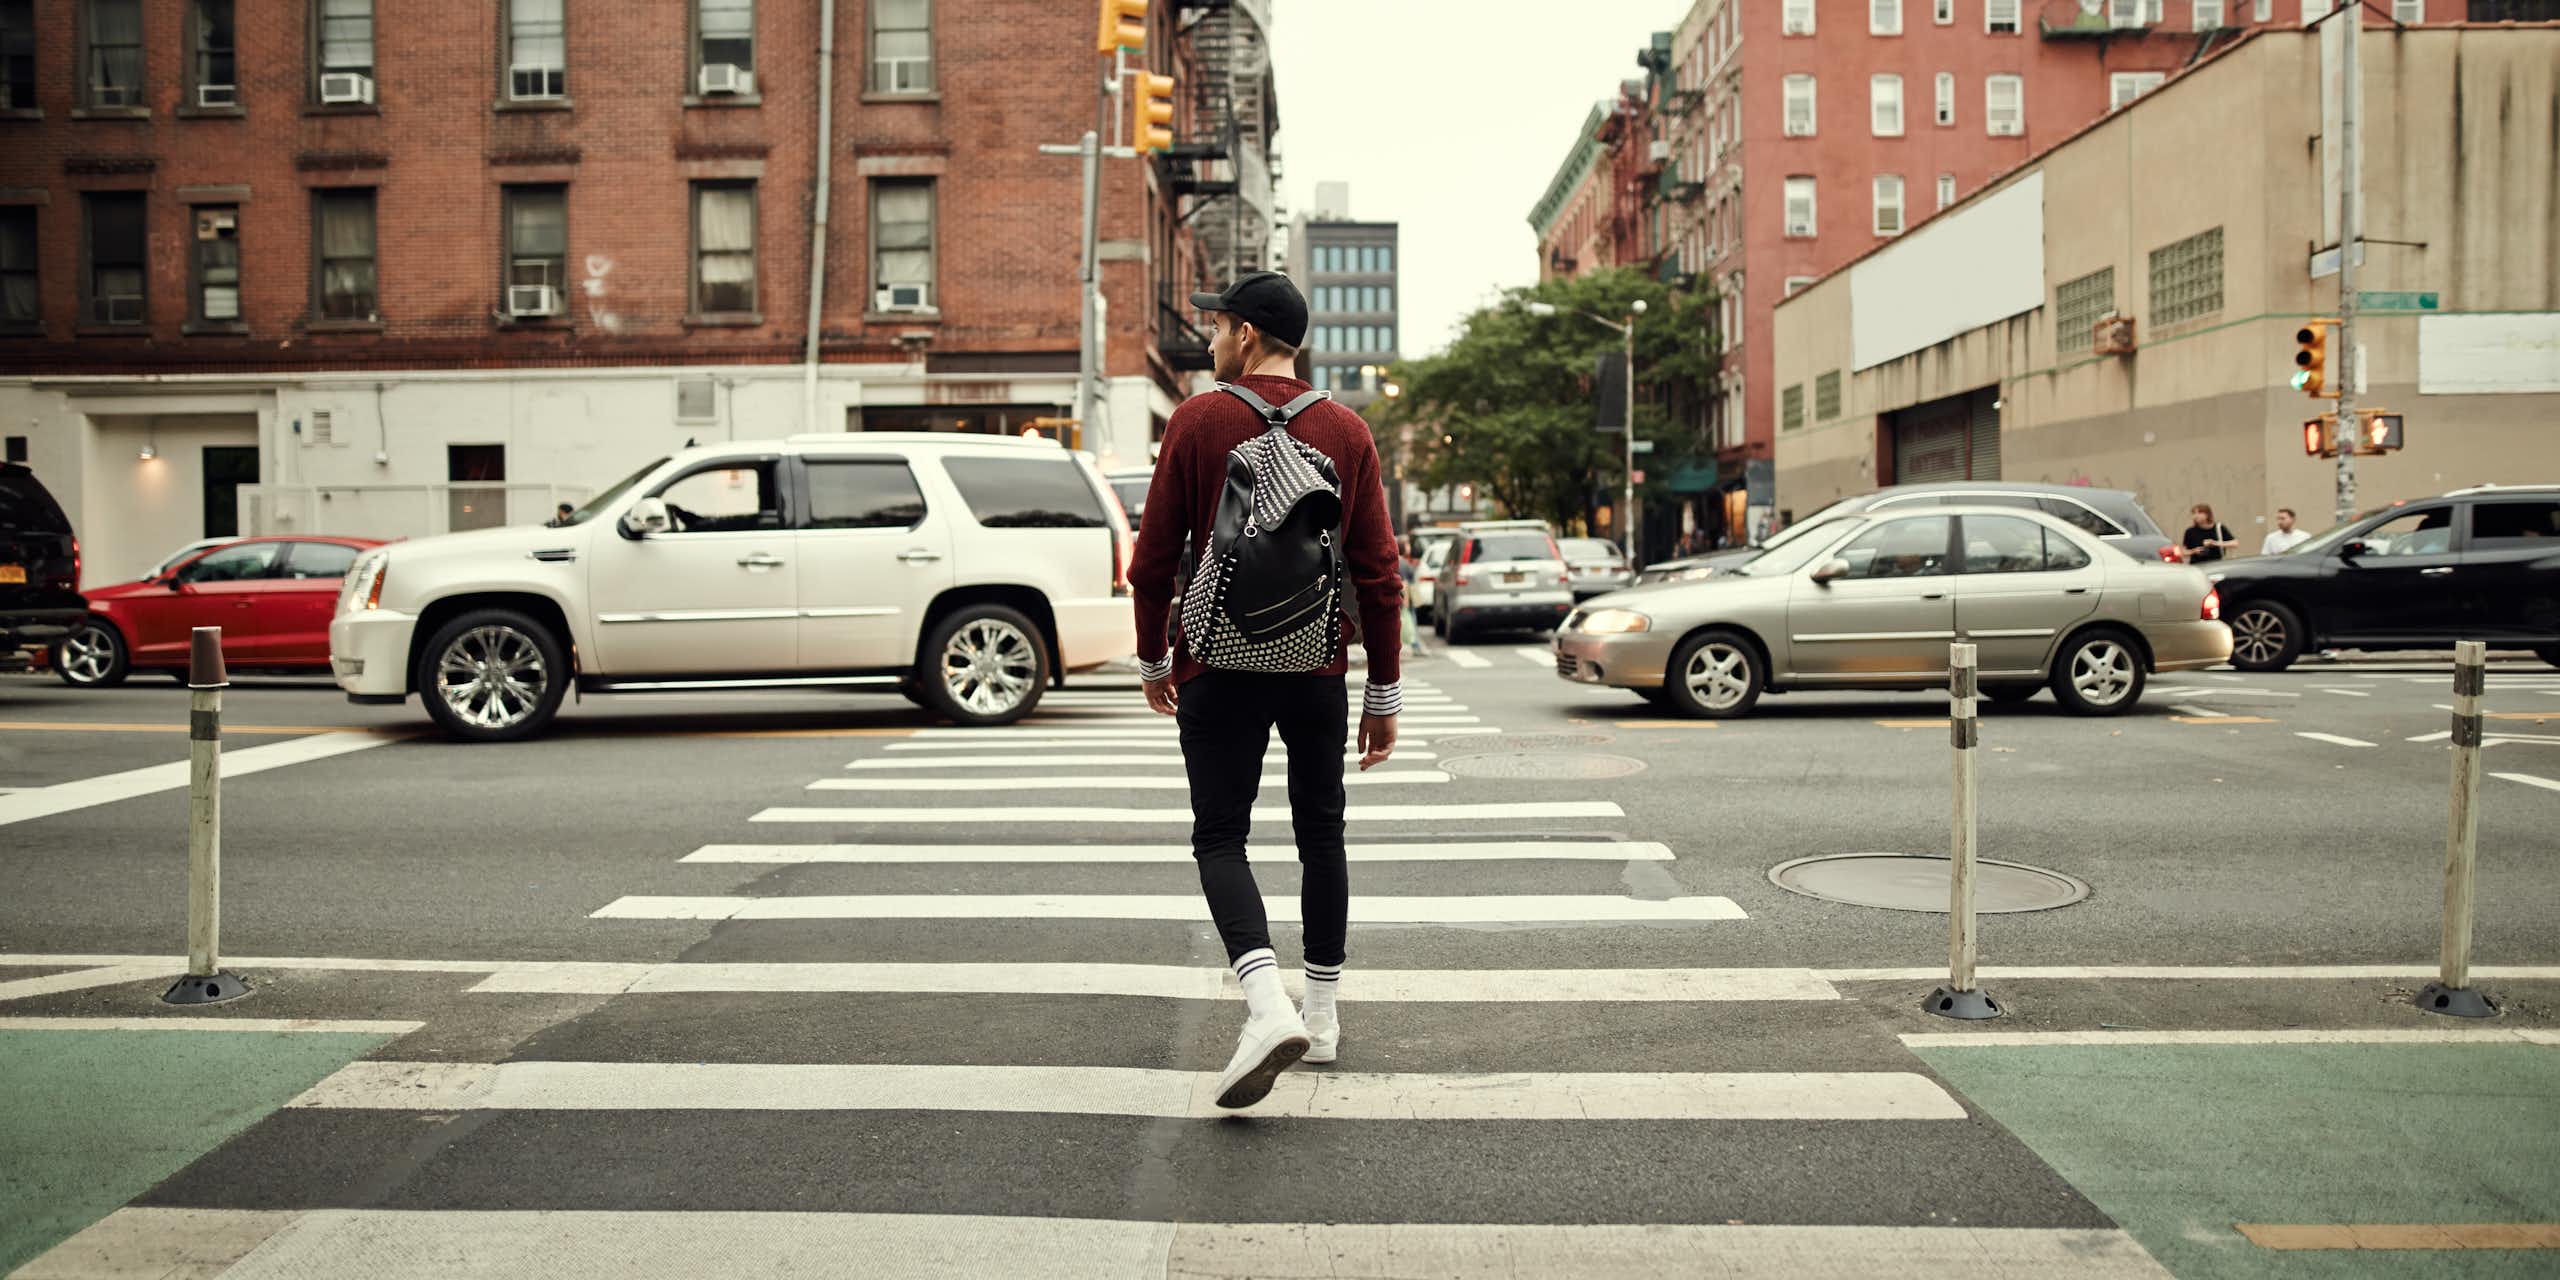 A person looks to one side while crossing a city street.